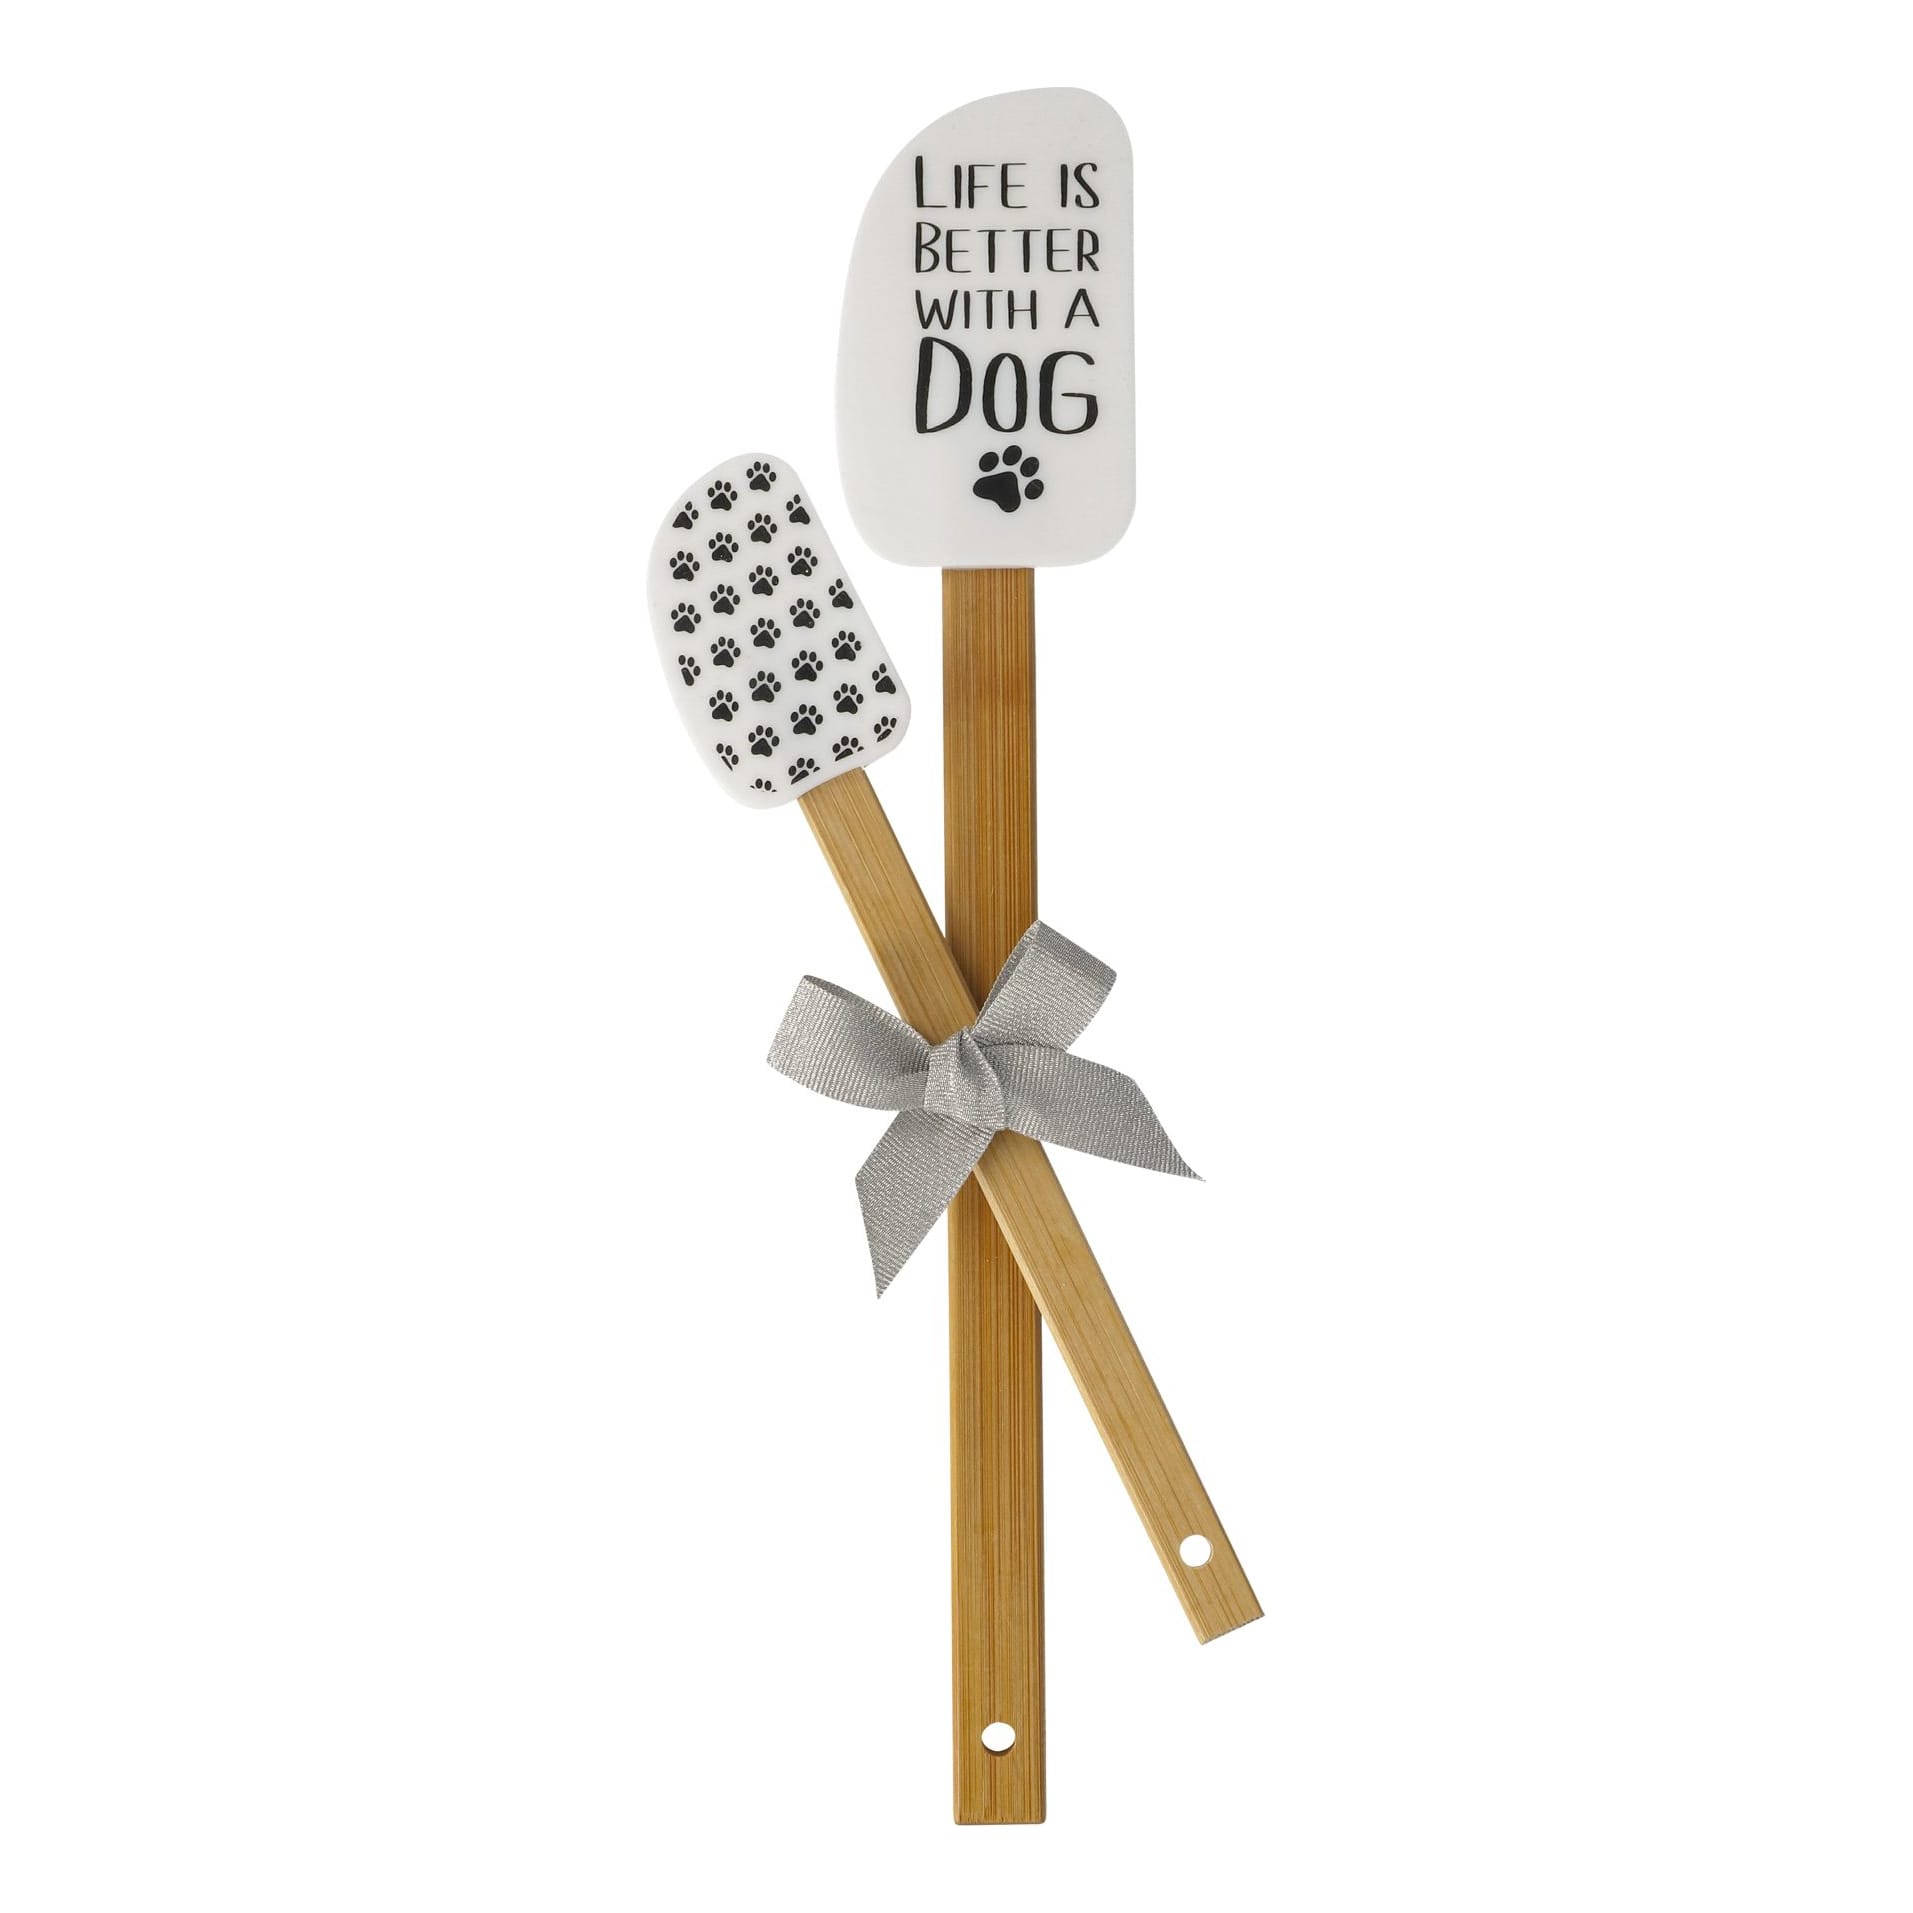 Bass Pro Shops® Life is Better with a Dog Spatula Set